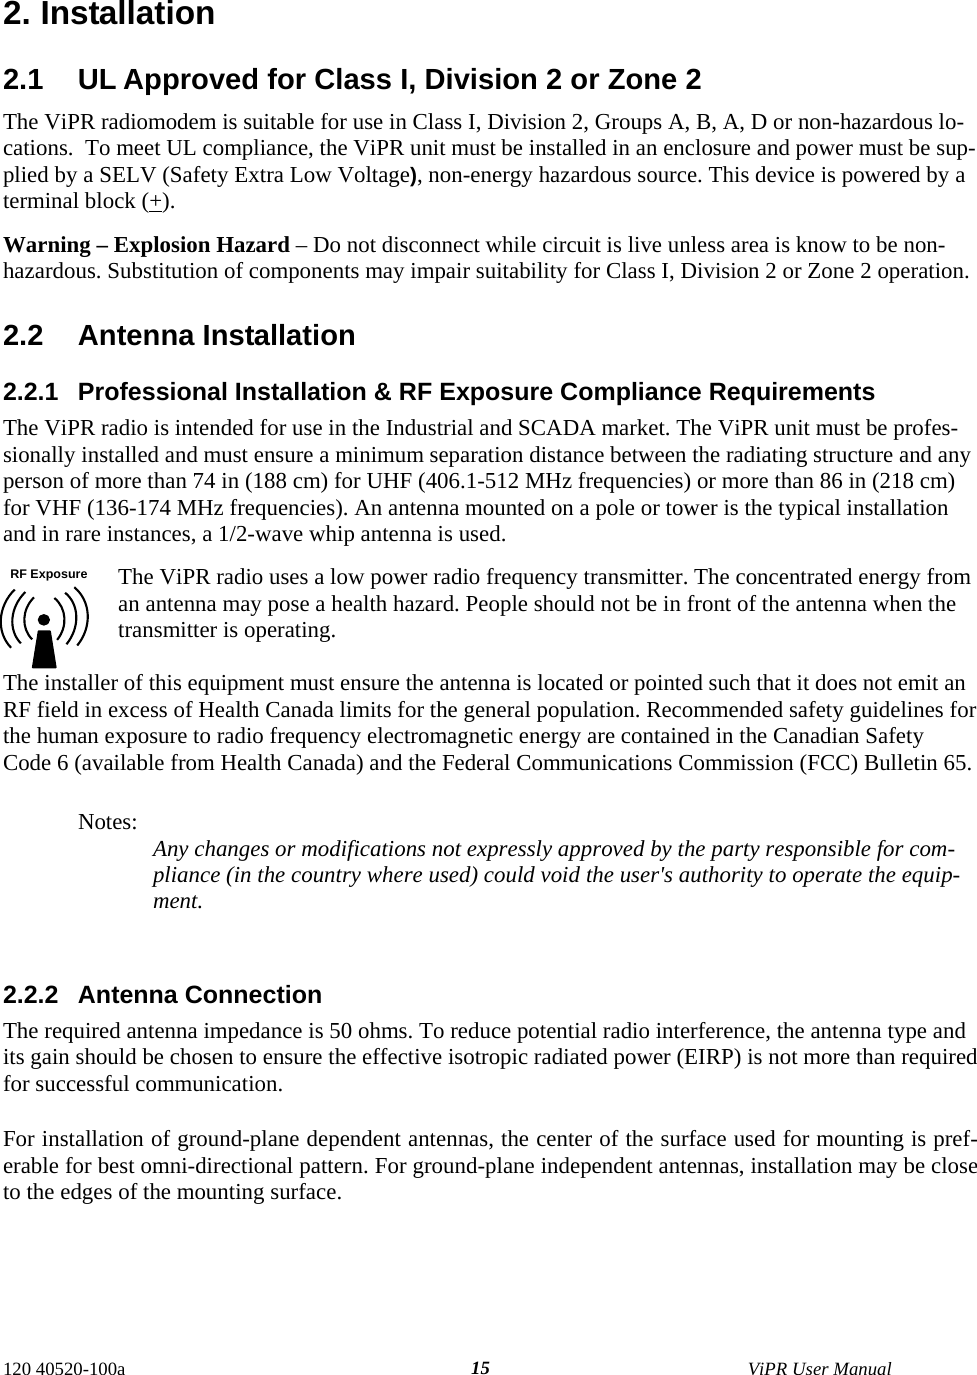  120 40520-100a    ViPR User Manual  152. Installation 2.1  UL Approved for Class I, Division 2 or Zone 2 The ViPR radiomodem is suitable for use in Class I, Division 2, Groups A, B, A, D or non-hazardous lo-cations.  To meet UL compliance, the ViPR unit must be installed in an enclosure and power must be sup-plied by a SELV (Safety Extra Low Voltage), non-energy hazardous source. This device is powered by a terminal block (+).  Warning – Explosion Hazard – Do not disconnect while circuit is live unless area is know to be non-hazardous. Substitution of components may impair suitability for Class I, Division 2 or Zone 2 operation.  2.2 Antenna Installation 2.2.1  Professional Installation &amp; RF Exposure Compliance Requirements The ViPR radio is intended for use in the Industrial and SCADA market. The ViPR unit must be profes-sionally installed and must ensure a minimum separation distance between the radiating structure and any person of more than 74 in (188 cm) for UHF (406.1-512 MHz frequencies) or more than 86 in (218 cm) for VHF (136-174 MHz frequencies). An antenna mounted on a pole or tower is the typical installation and in rare instances, a 1/2-wave whip antenna is used. The ViPR radio uses a low power radio frequency transmitter. The concentrated energy from an antenna may pose a health hazard. People should not be in front of the antenna when the transmitter is operating.  The installer of this equipment must ensure the antenna is located or pointed such that it does not emit an RF field in excess of Health Canada limits for the general population. Recommended safety guidelines for the human exposure to radio frequency electromagnetic energy are contained in the Canadian Safety Code 6 (available from Health Canada) and the Federal Communications Commission (FCC) Bulletin 65.  Notes:  Any changes or modifications not expressly approved by the party responsible for com-pliance (in the country where used) could void the user&apos;s authority to operate the equip-ment.   2.2.2 Antenna Connection The required antenna impedance is 50 ohms. To reduce potential radio interference, the antenna type and its gain should be chosen to ensure the effective isotropic radiated power (EIRP) is not more than required for successful communication. For installation of ground-plane dependent antennas, the center of the surface used for mounting is pref-erable for best omni-directional pattern. For ground-plane independent antennas, installation may be close to the edges of the mounting surface.     RF Exposure 